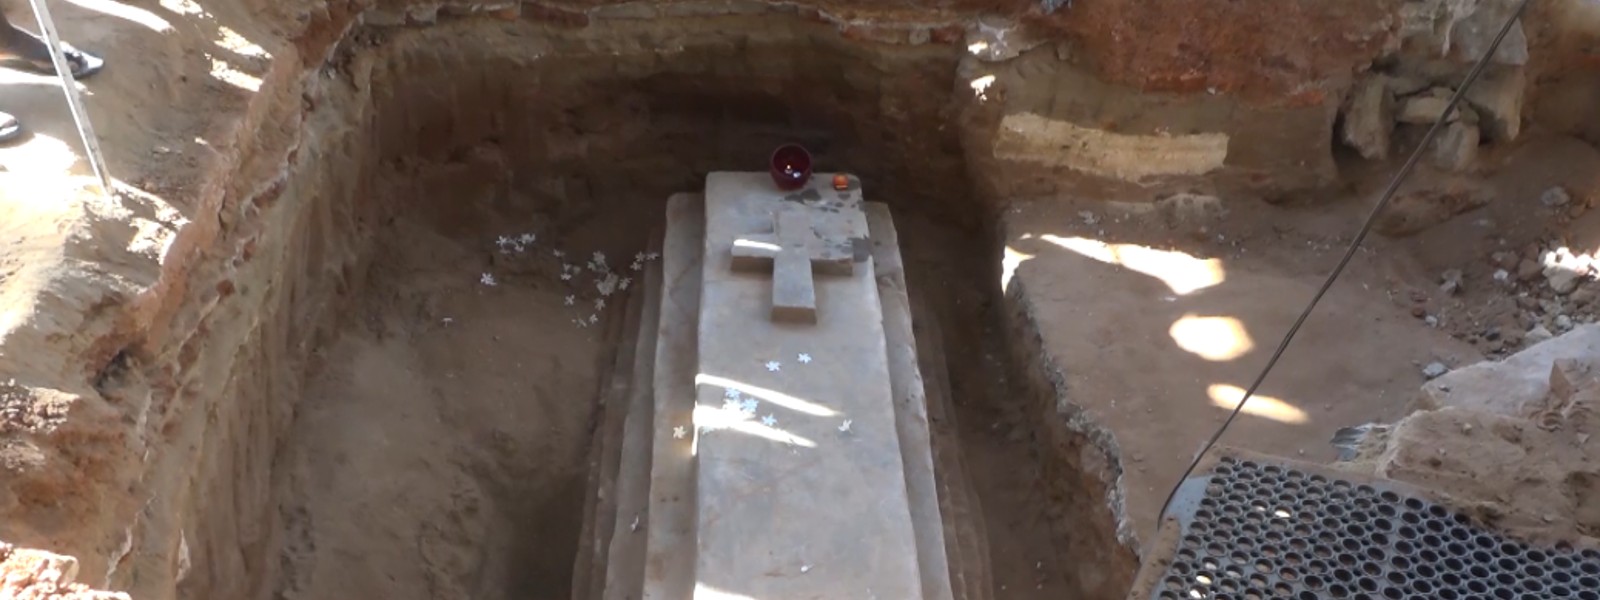 Archaeology officials to inspect tomb found at Wennappuwa Church